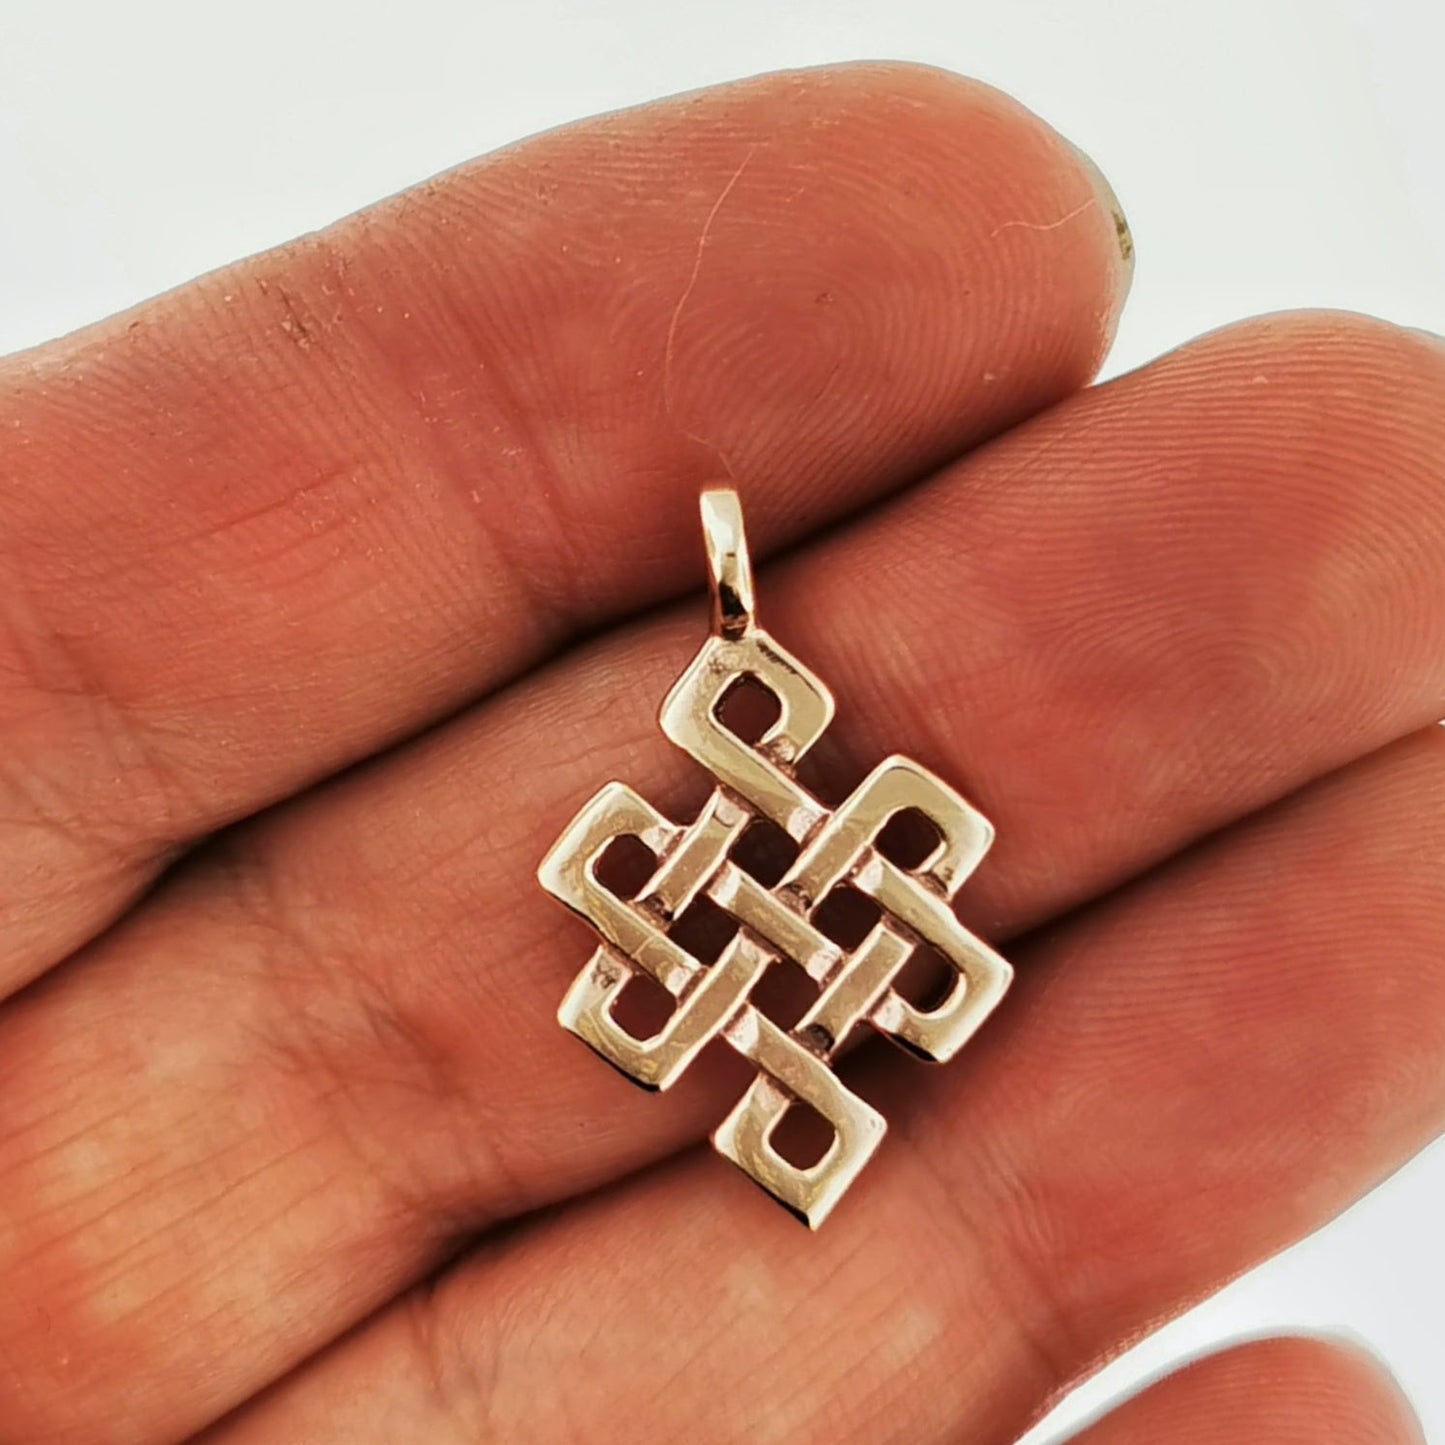 Endless Knot Pendant in Sterling Silver or Antique Bronze